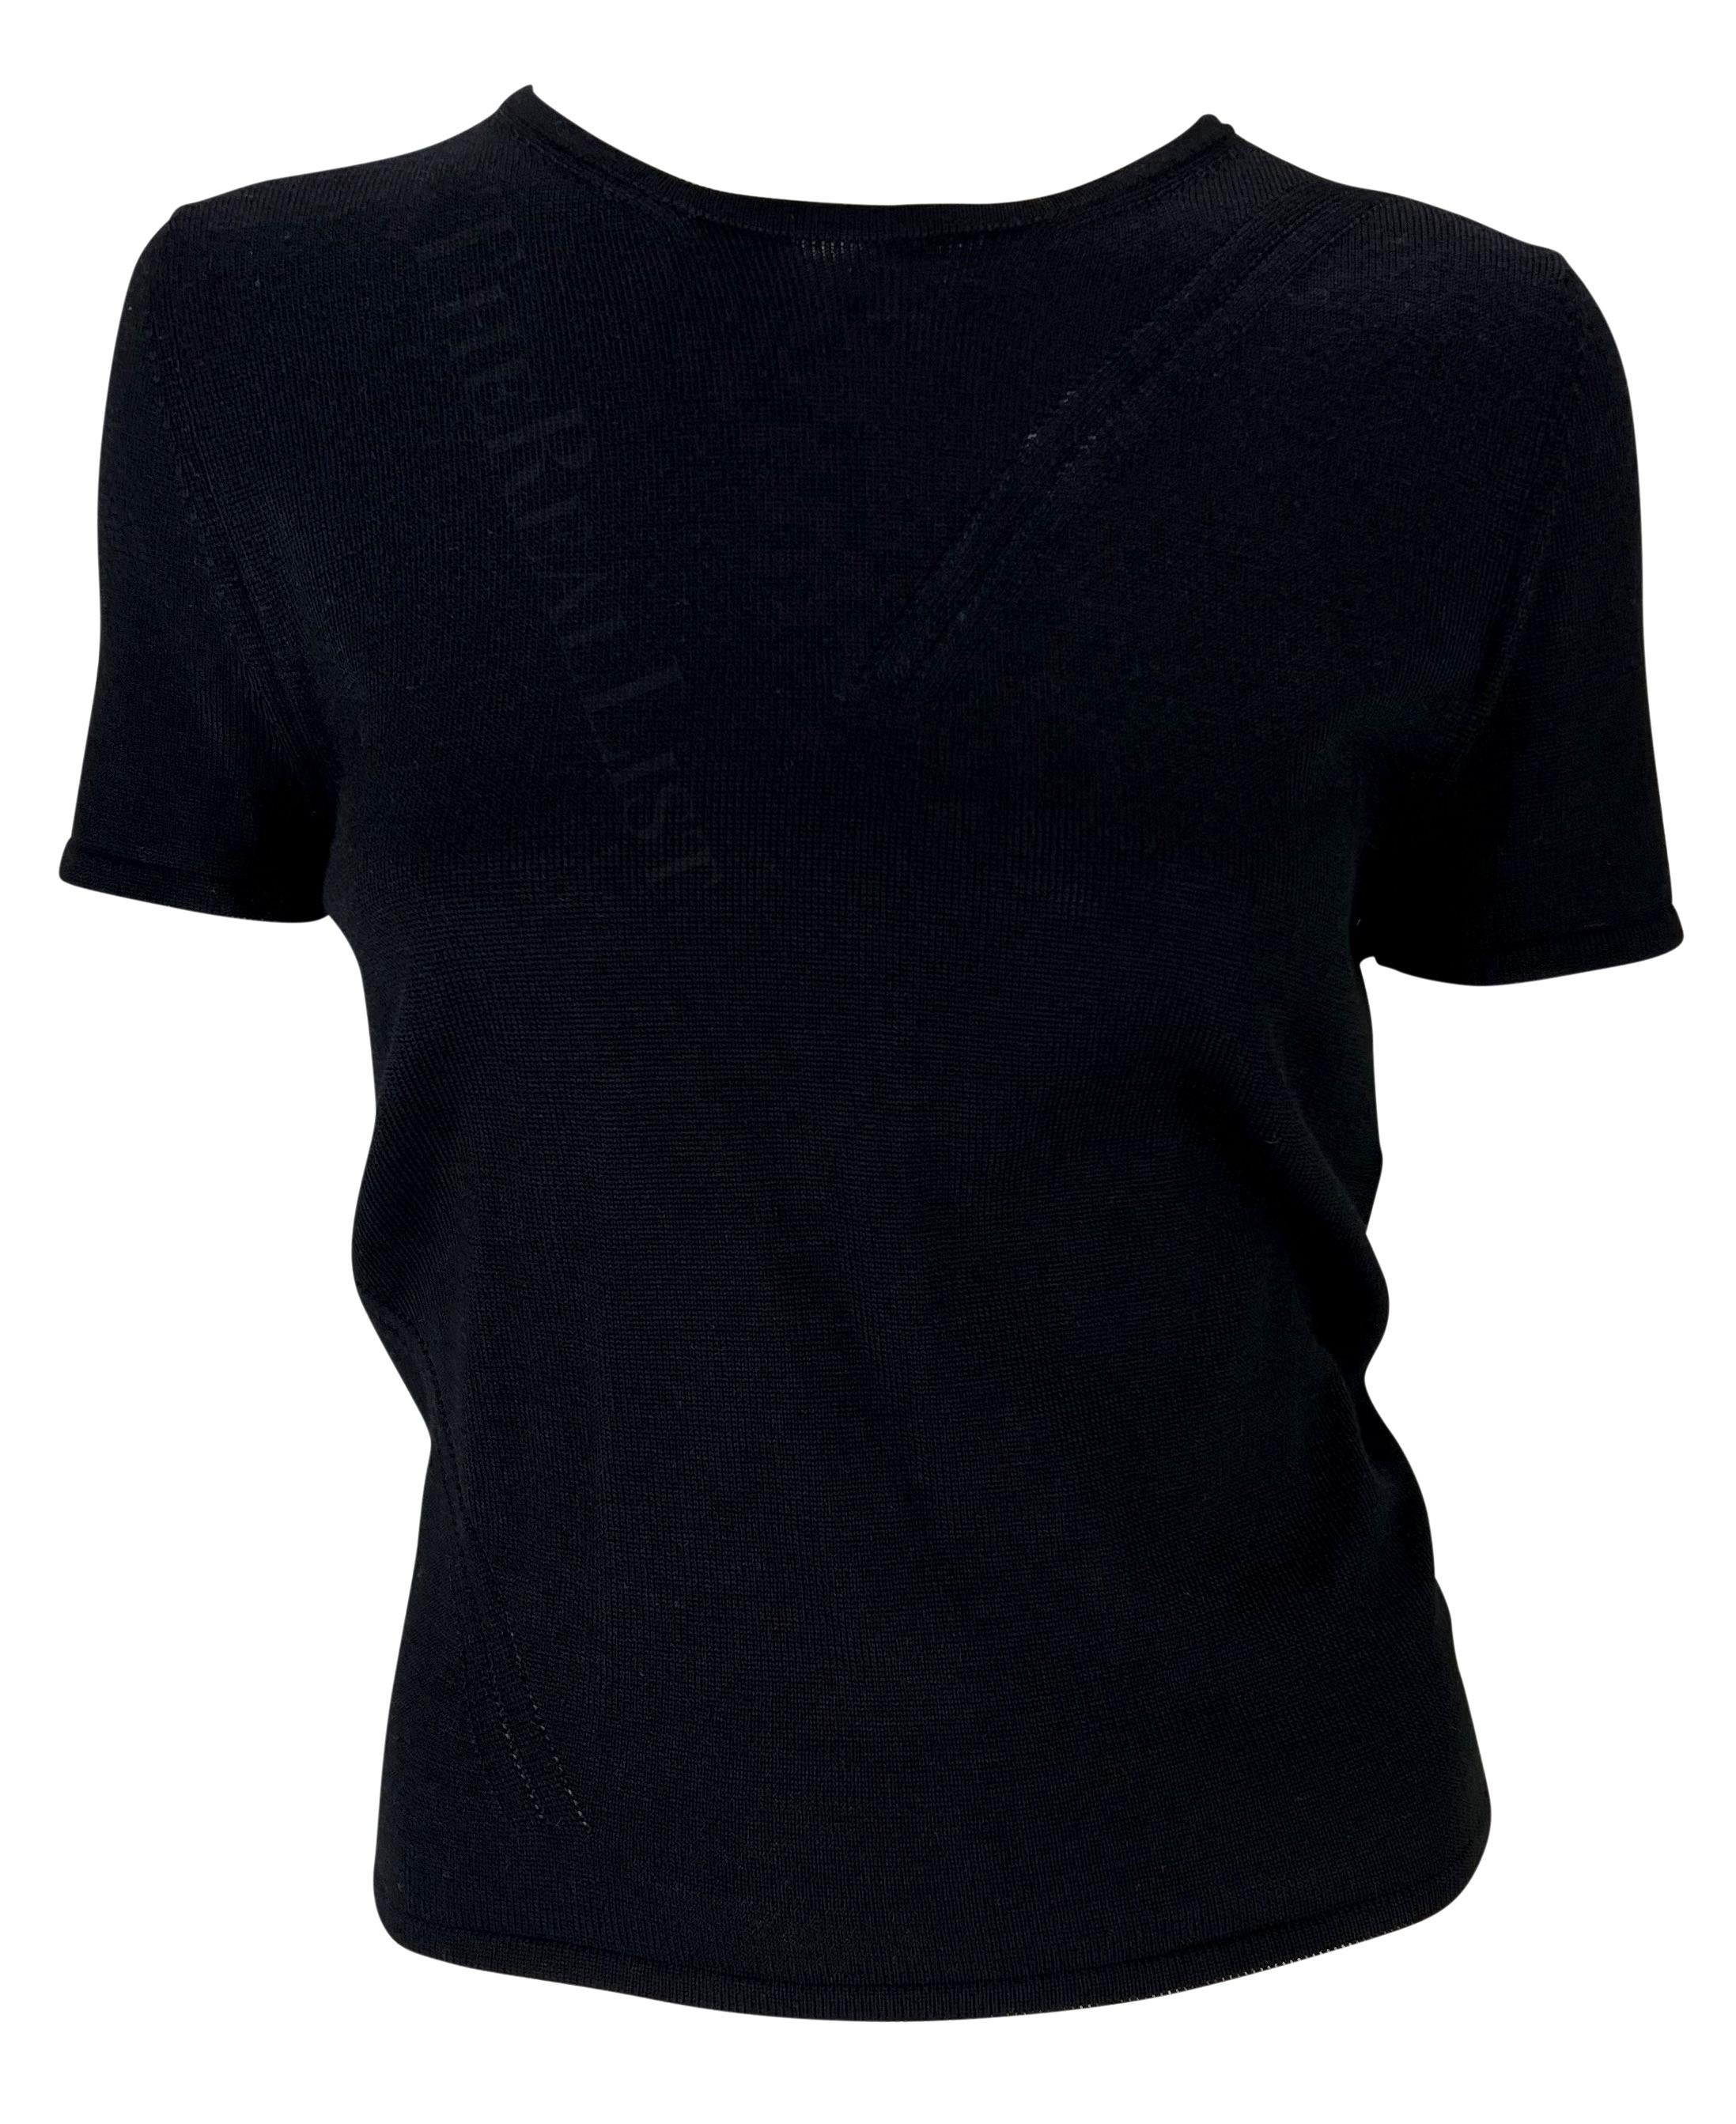 Women's S/S 1997 Gucci by Tom Ford Open Back Black Stretch Knit Short-Sleeve Top For Sale